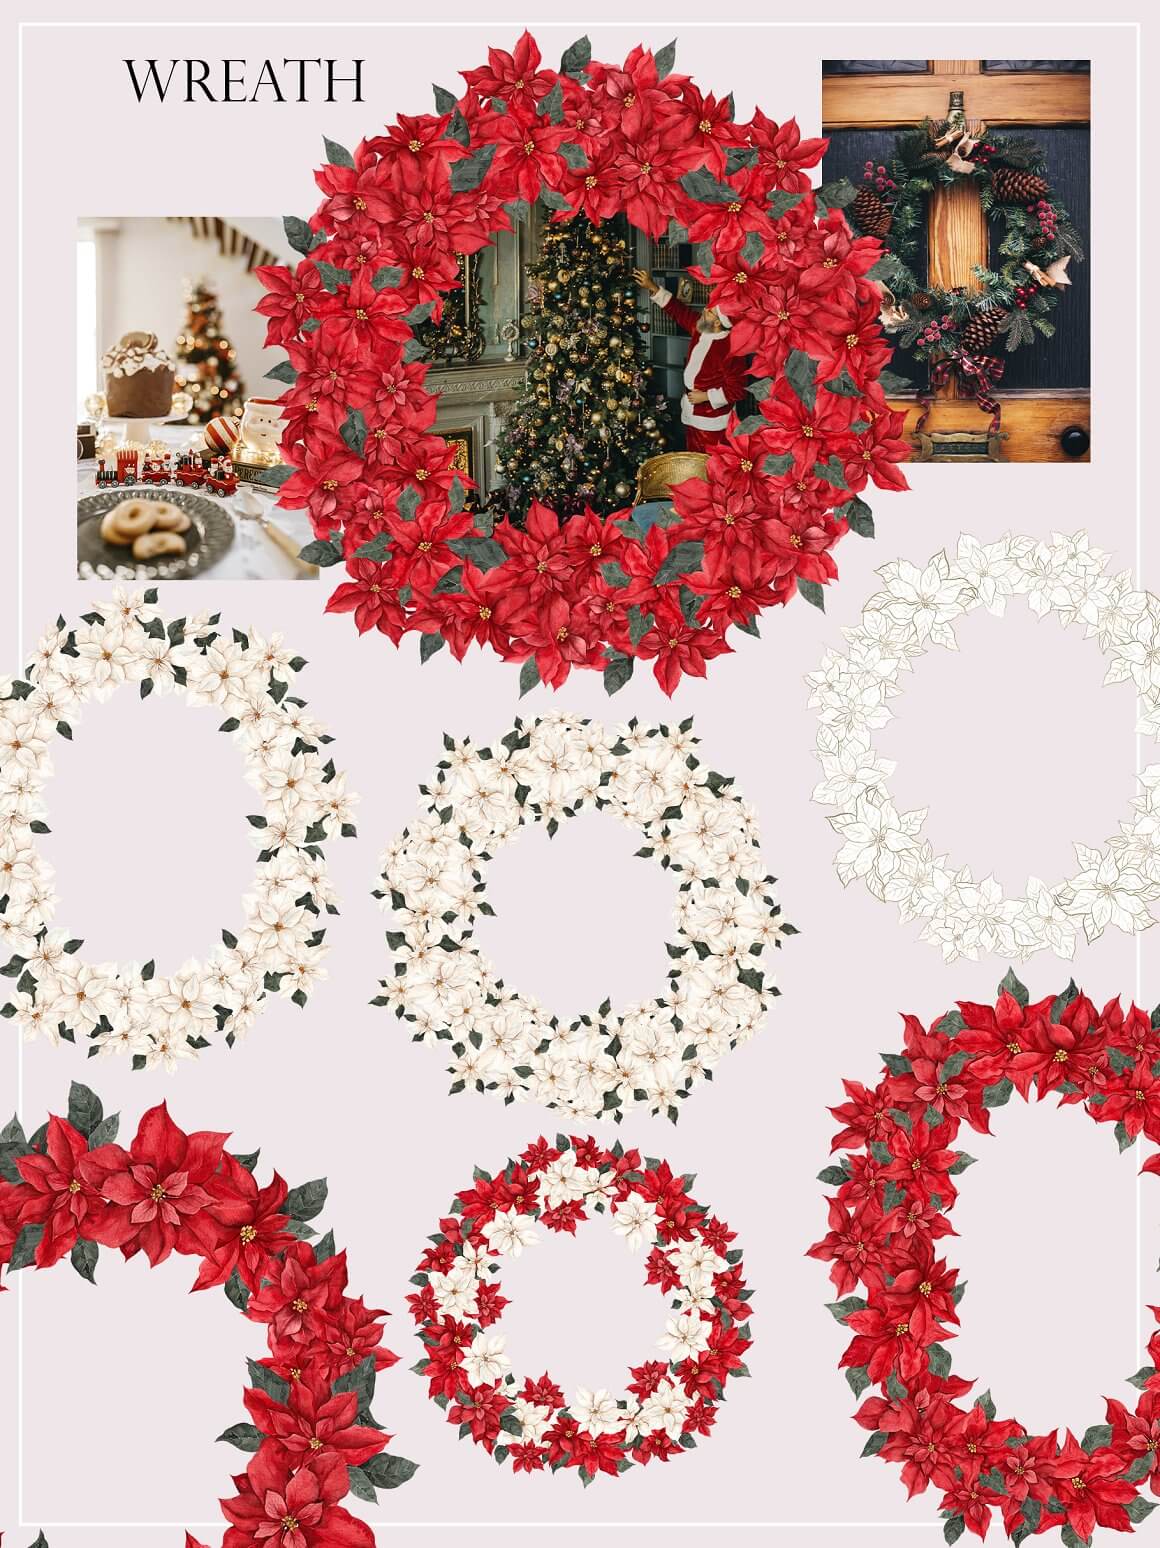 Christmas wreaths of white and red poinsettia of different diameters.